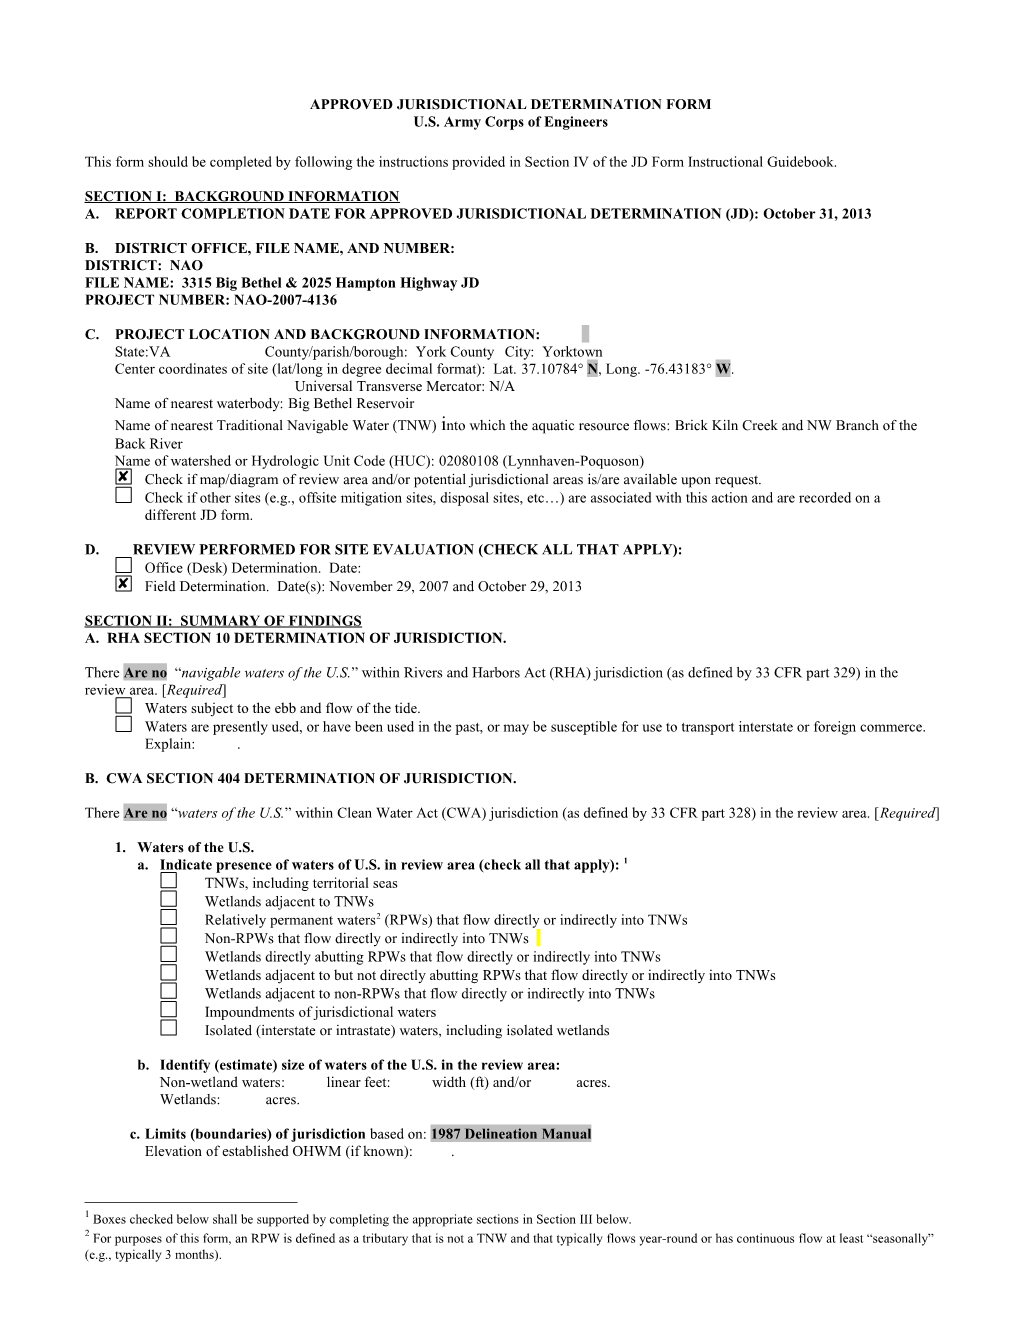 Approved Jurisdictional Determination Form s3